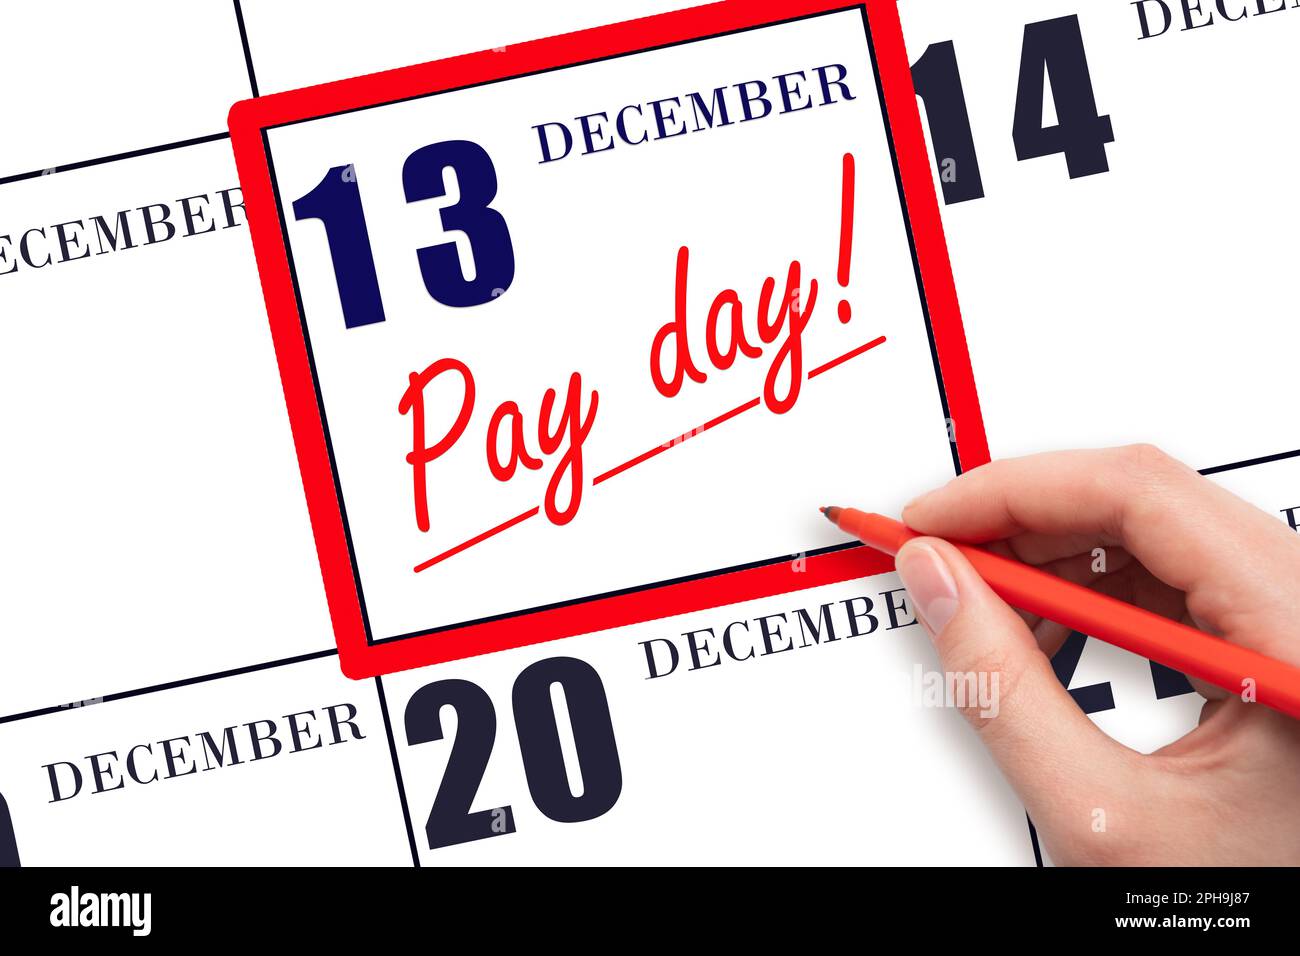 13th day of December. Hand writing text PAY DATE on calendar date December 13 and underline it. Payment due date. Reminder concept of payment. Winter Stock Photo